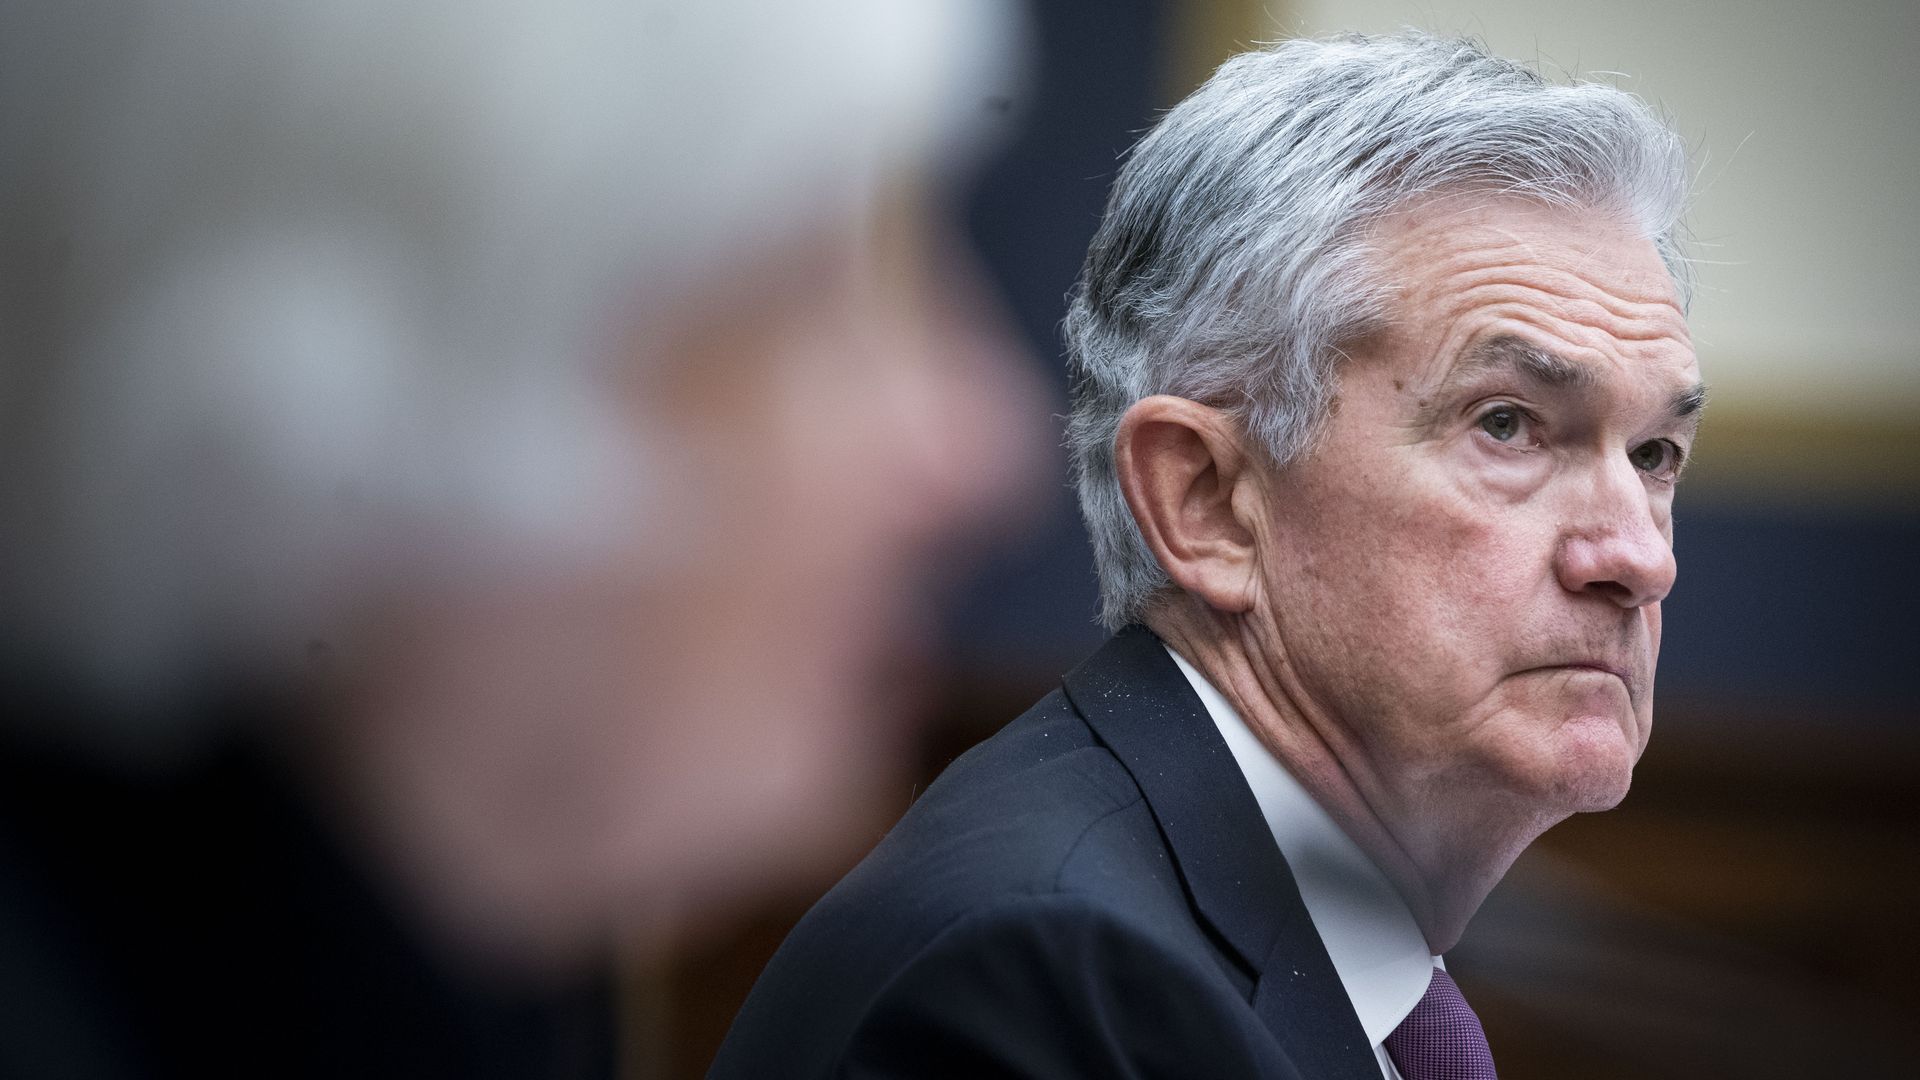 Federal Reserve Chair Jerome Powell during a congressional hearing in September 2021.